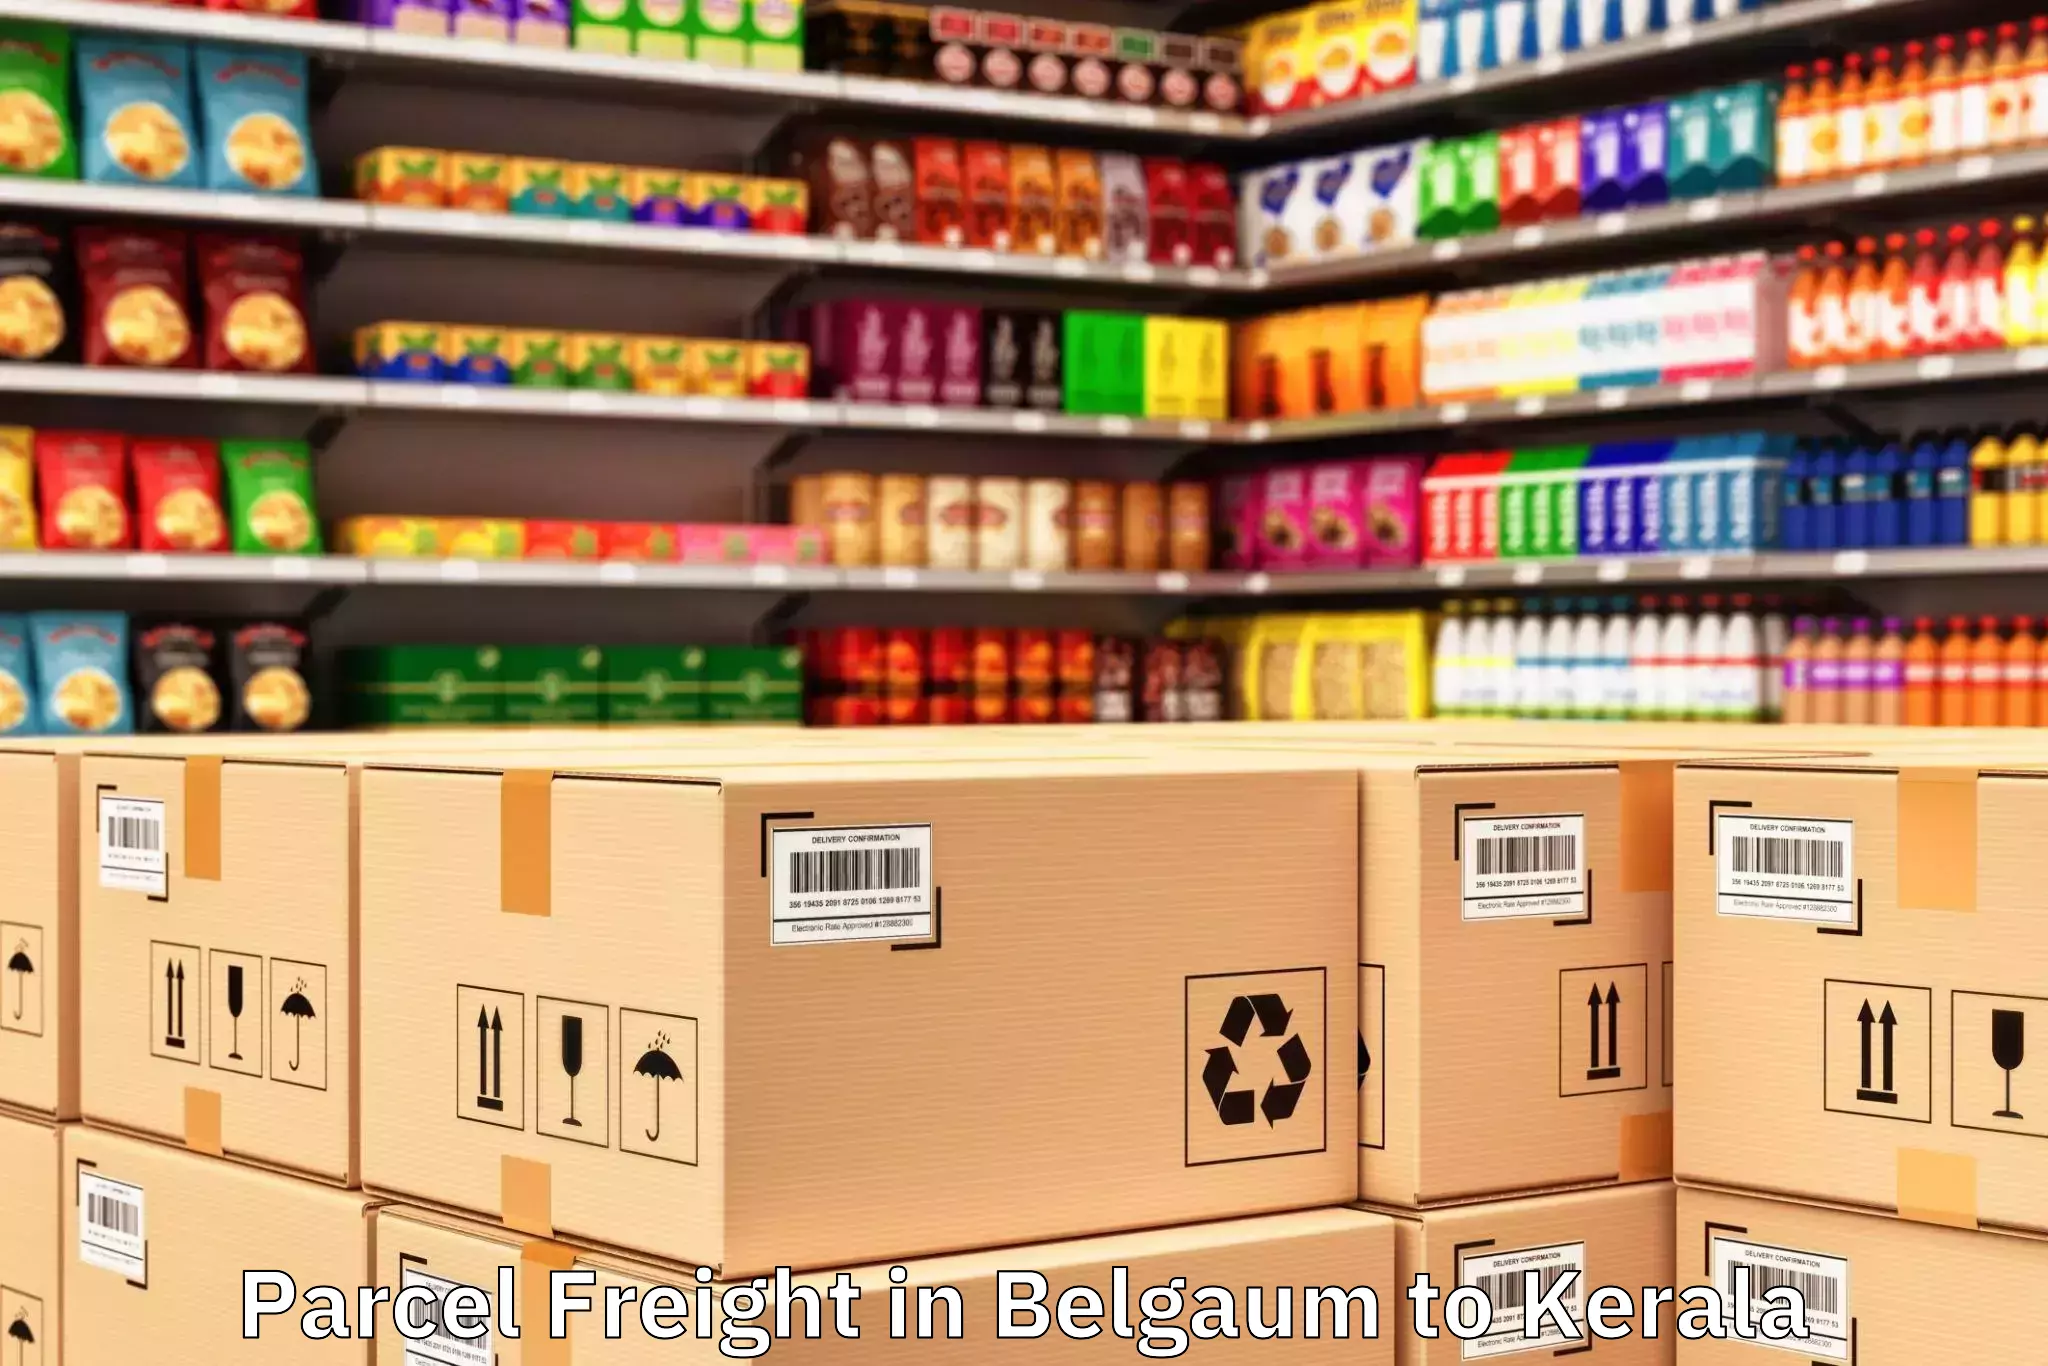 Top Belgaum to Kerala Parcel Freight Available